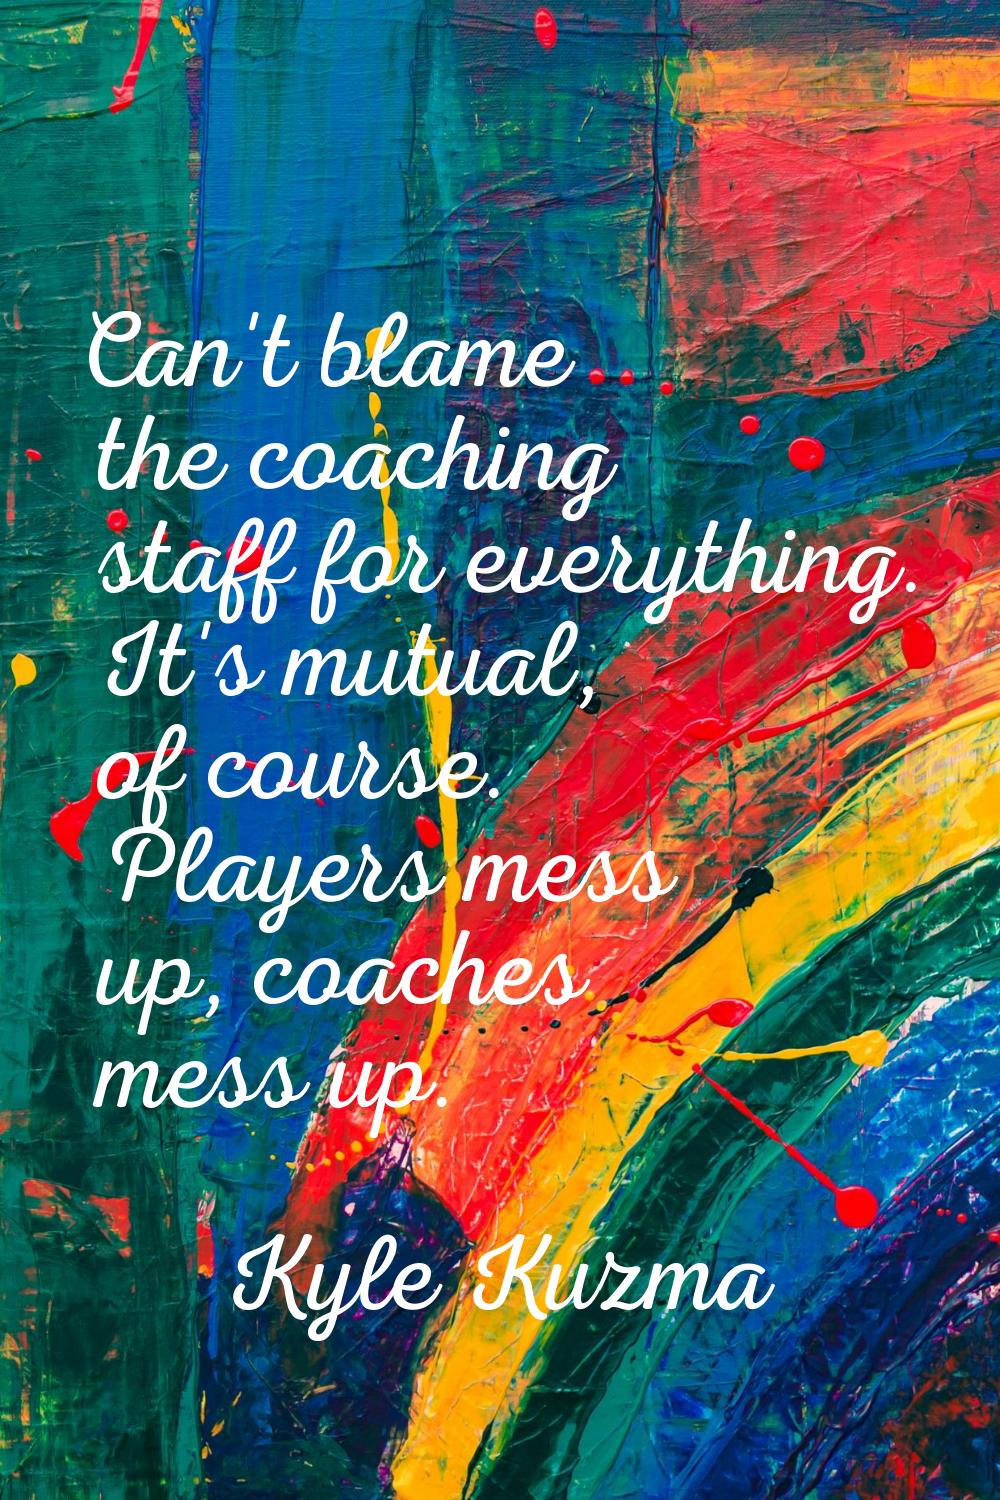 Can't blame the coaching staff for everything. It's mutual, of course. Players mess up, coaches mes